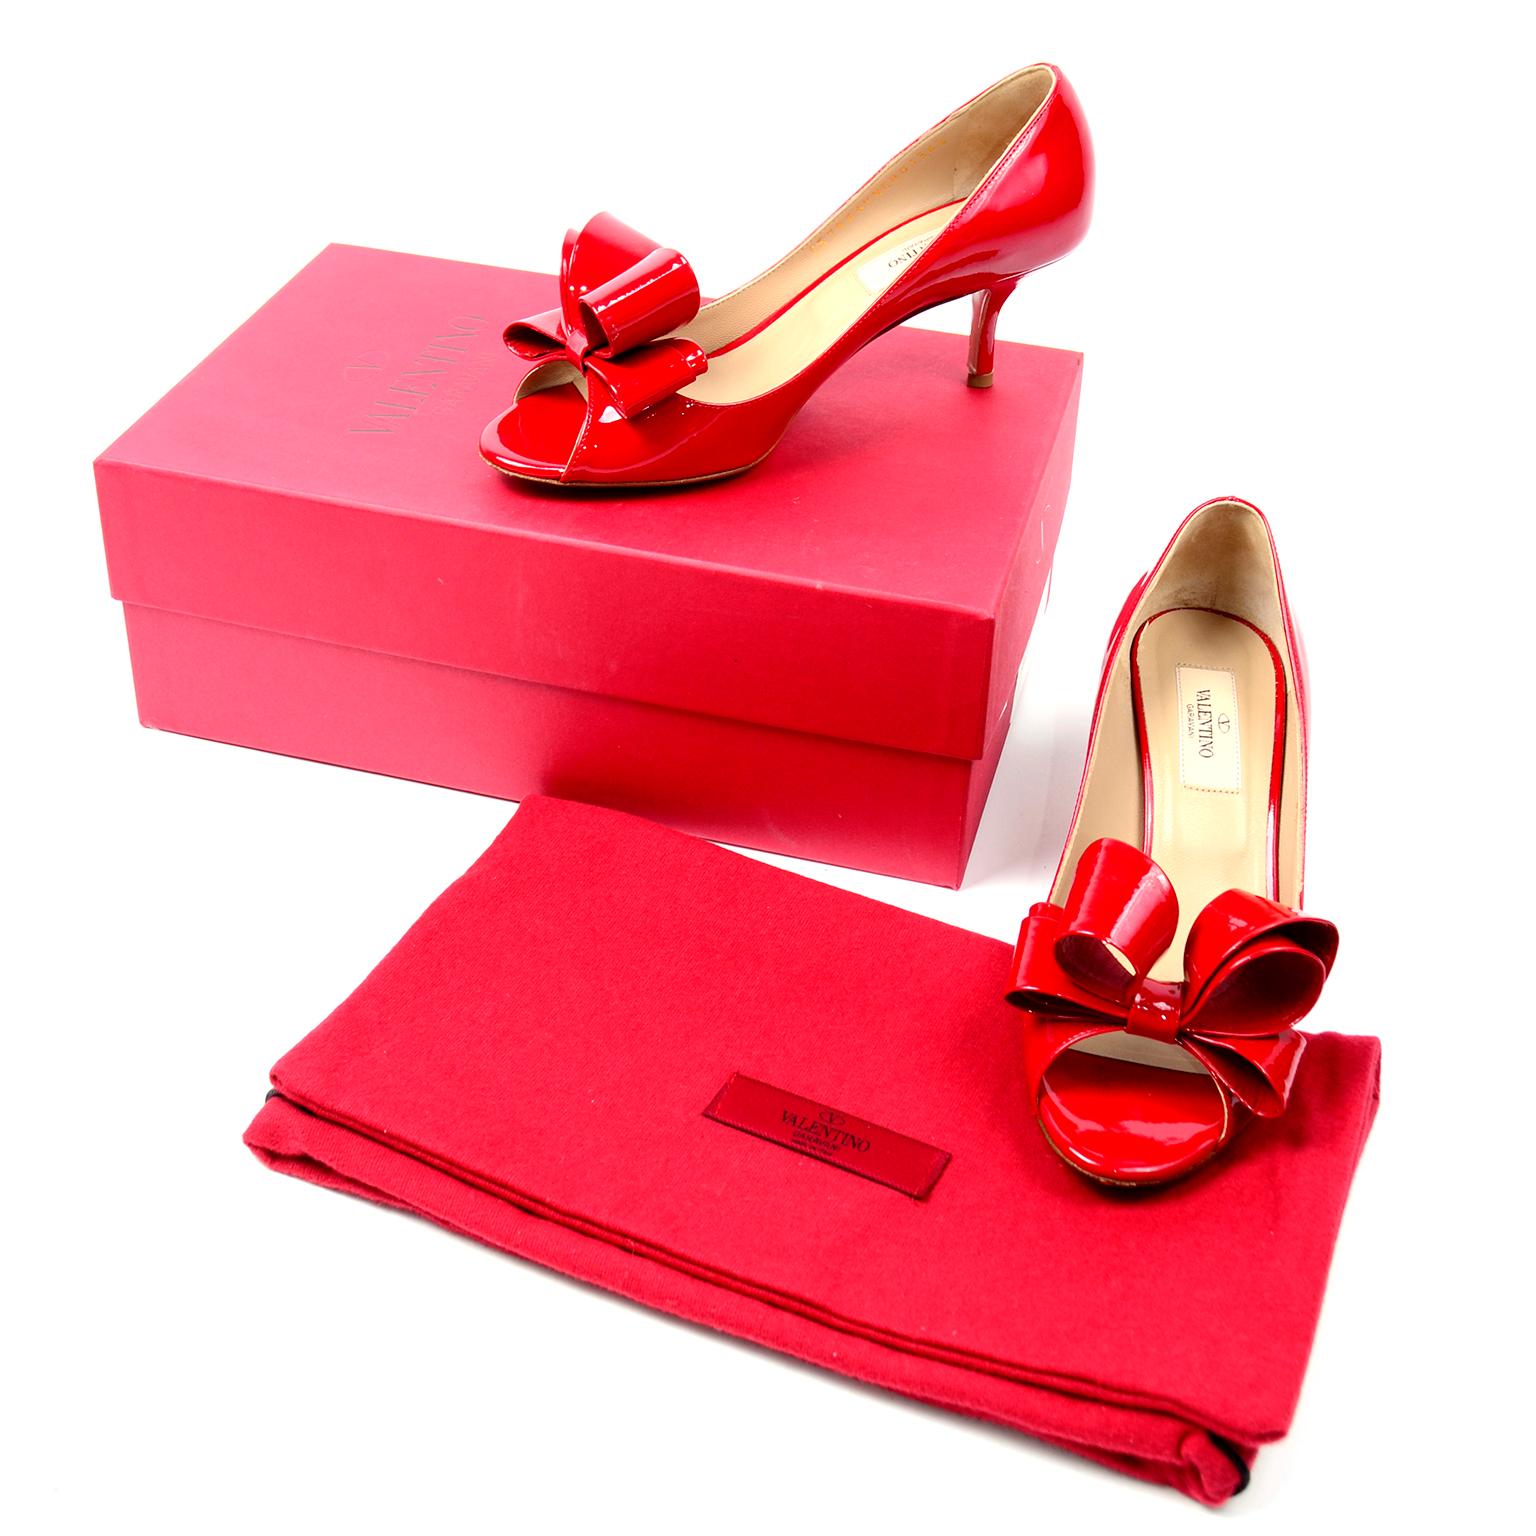 These fabulous iconic Valentino bow pumps are entirely crafted from a cherry red patent leather. These peep toe shoes have beautiful beige leather interior and sole. We love the structured bow that makes these shoes stand out. These shoes come with